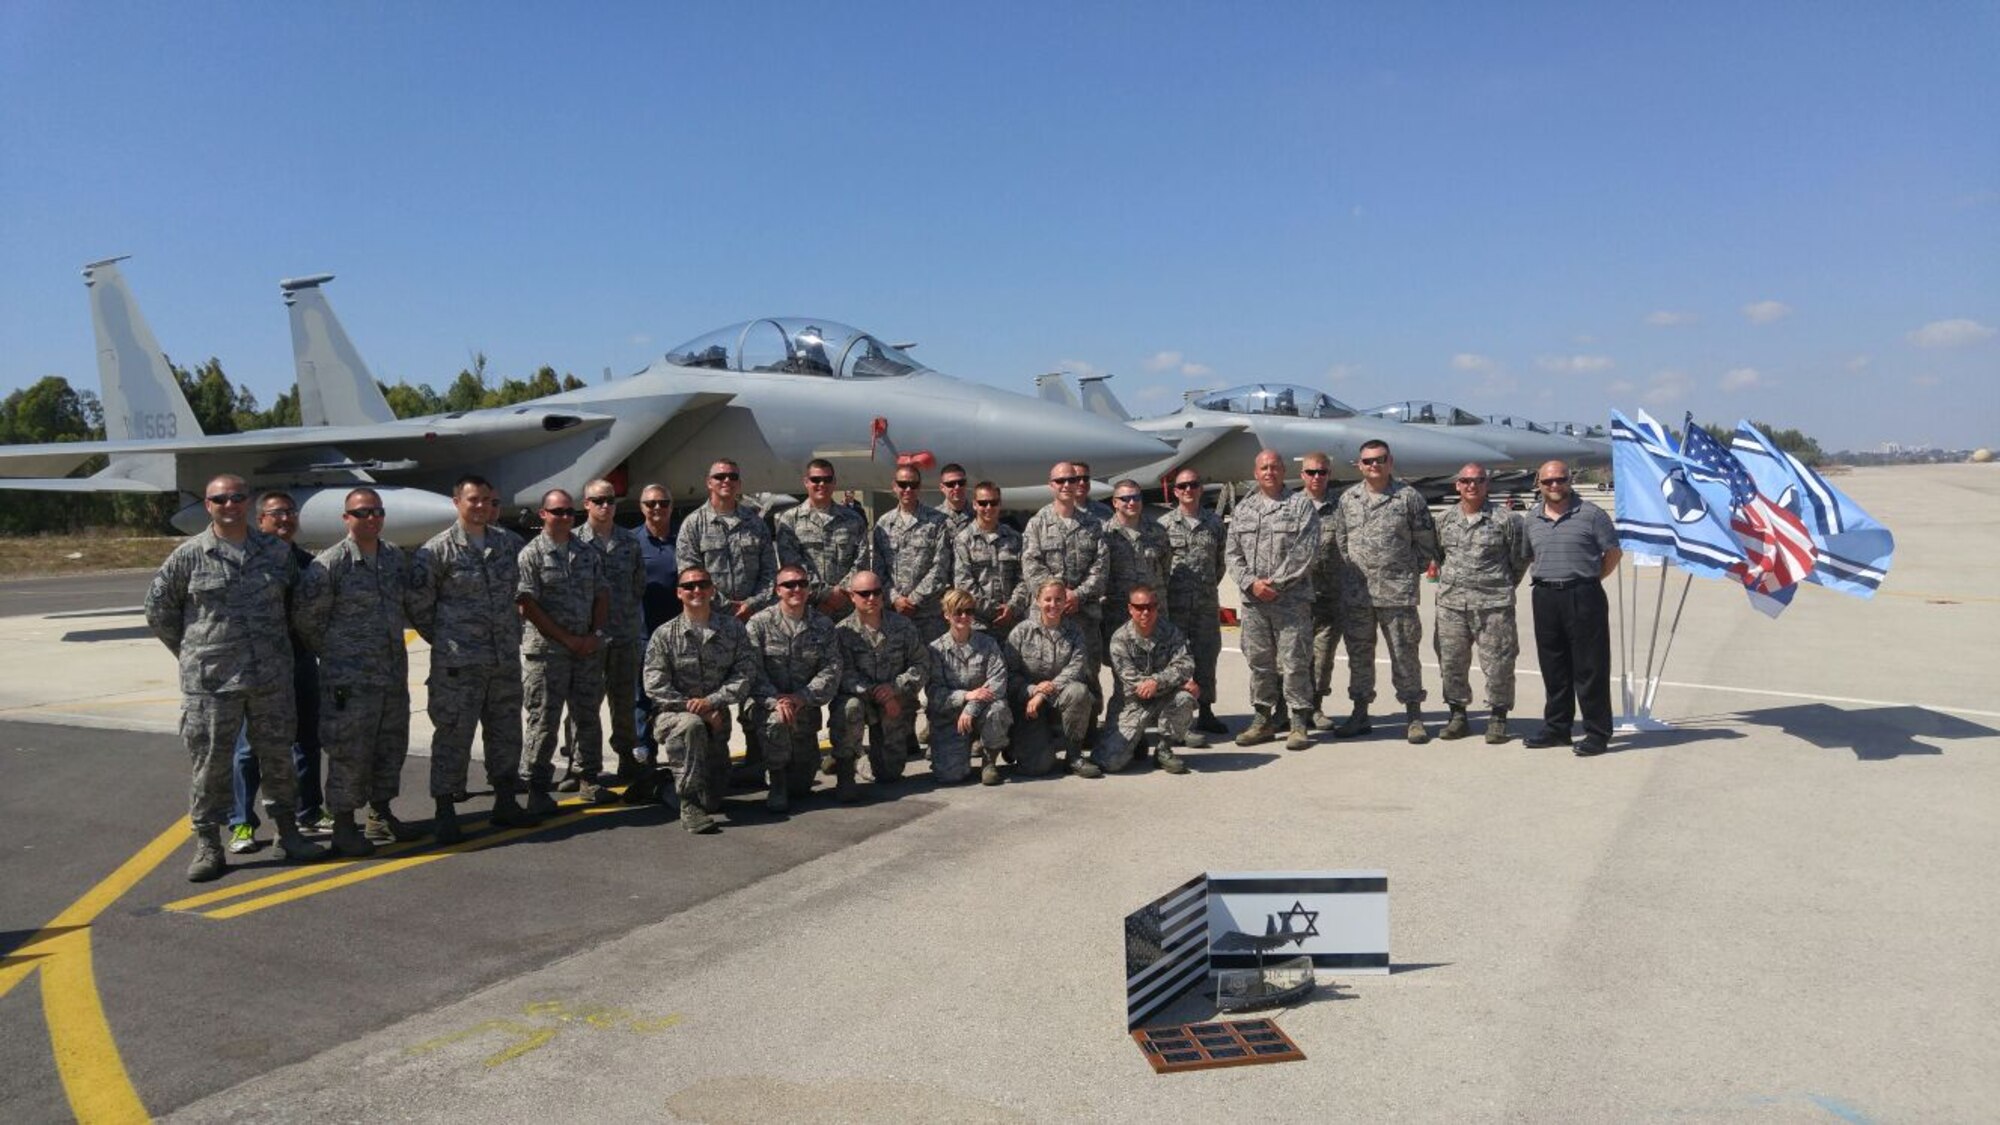 Airmen from the 173rd Fighter Wing, Oregon Air National Guard, pose with for a group photo in front of the just delivered F-15 Eagles at Tel Nof air base in Israel.  After two years of planning and final execution, the wing participated in a historic active ramp to ramp transfer of aircraft.  (U.S. Air National Guard photo by Master Sgt. Michael Shirar)